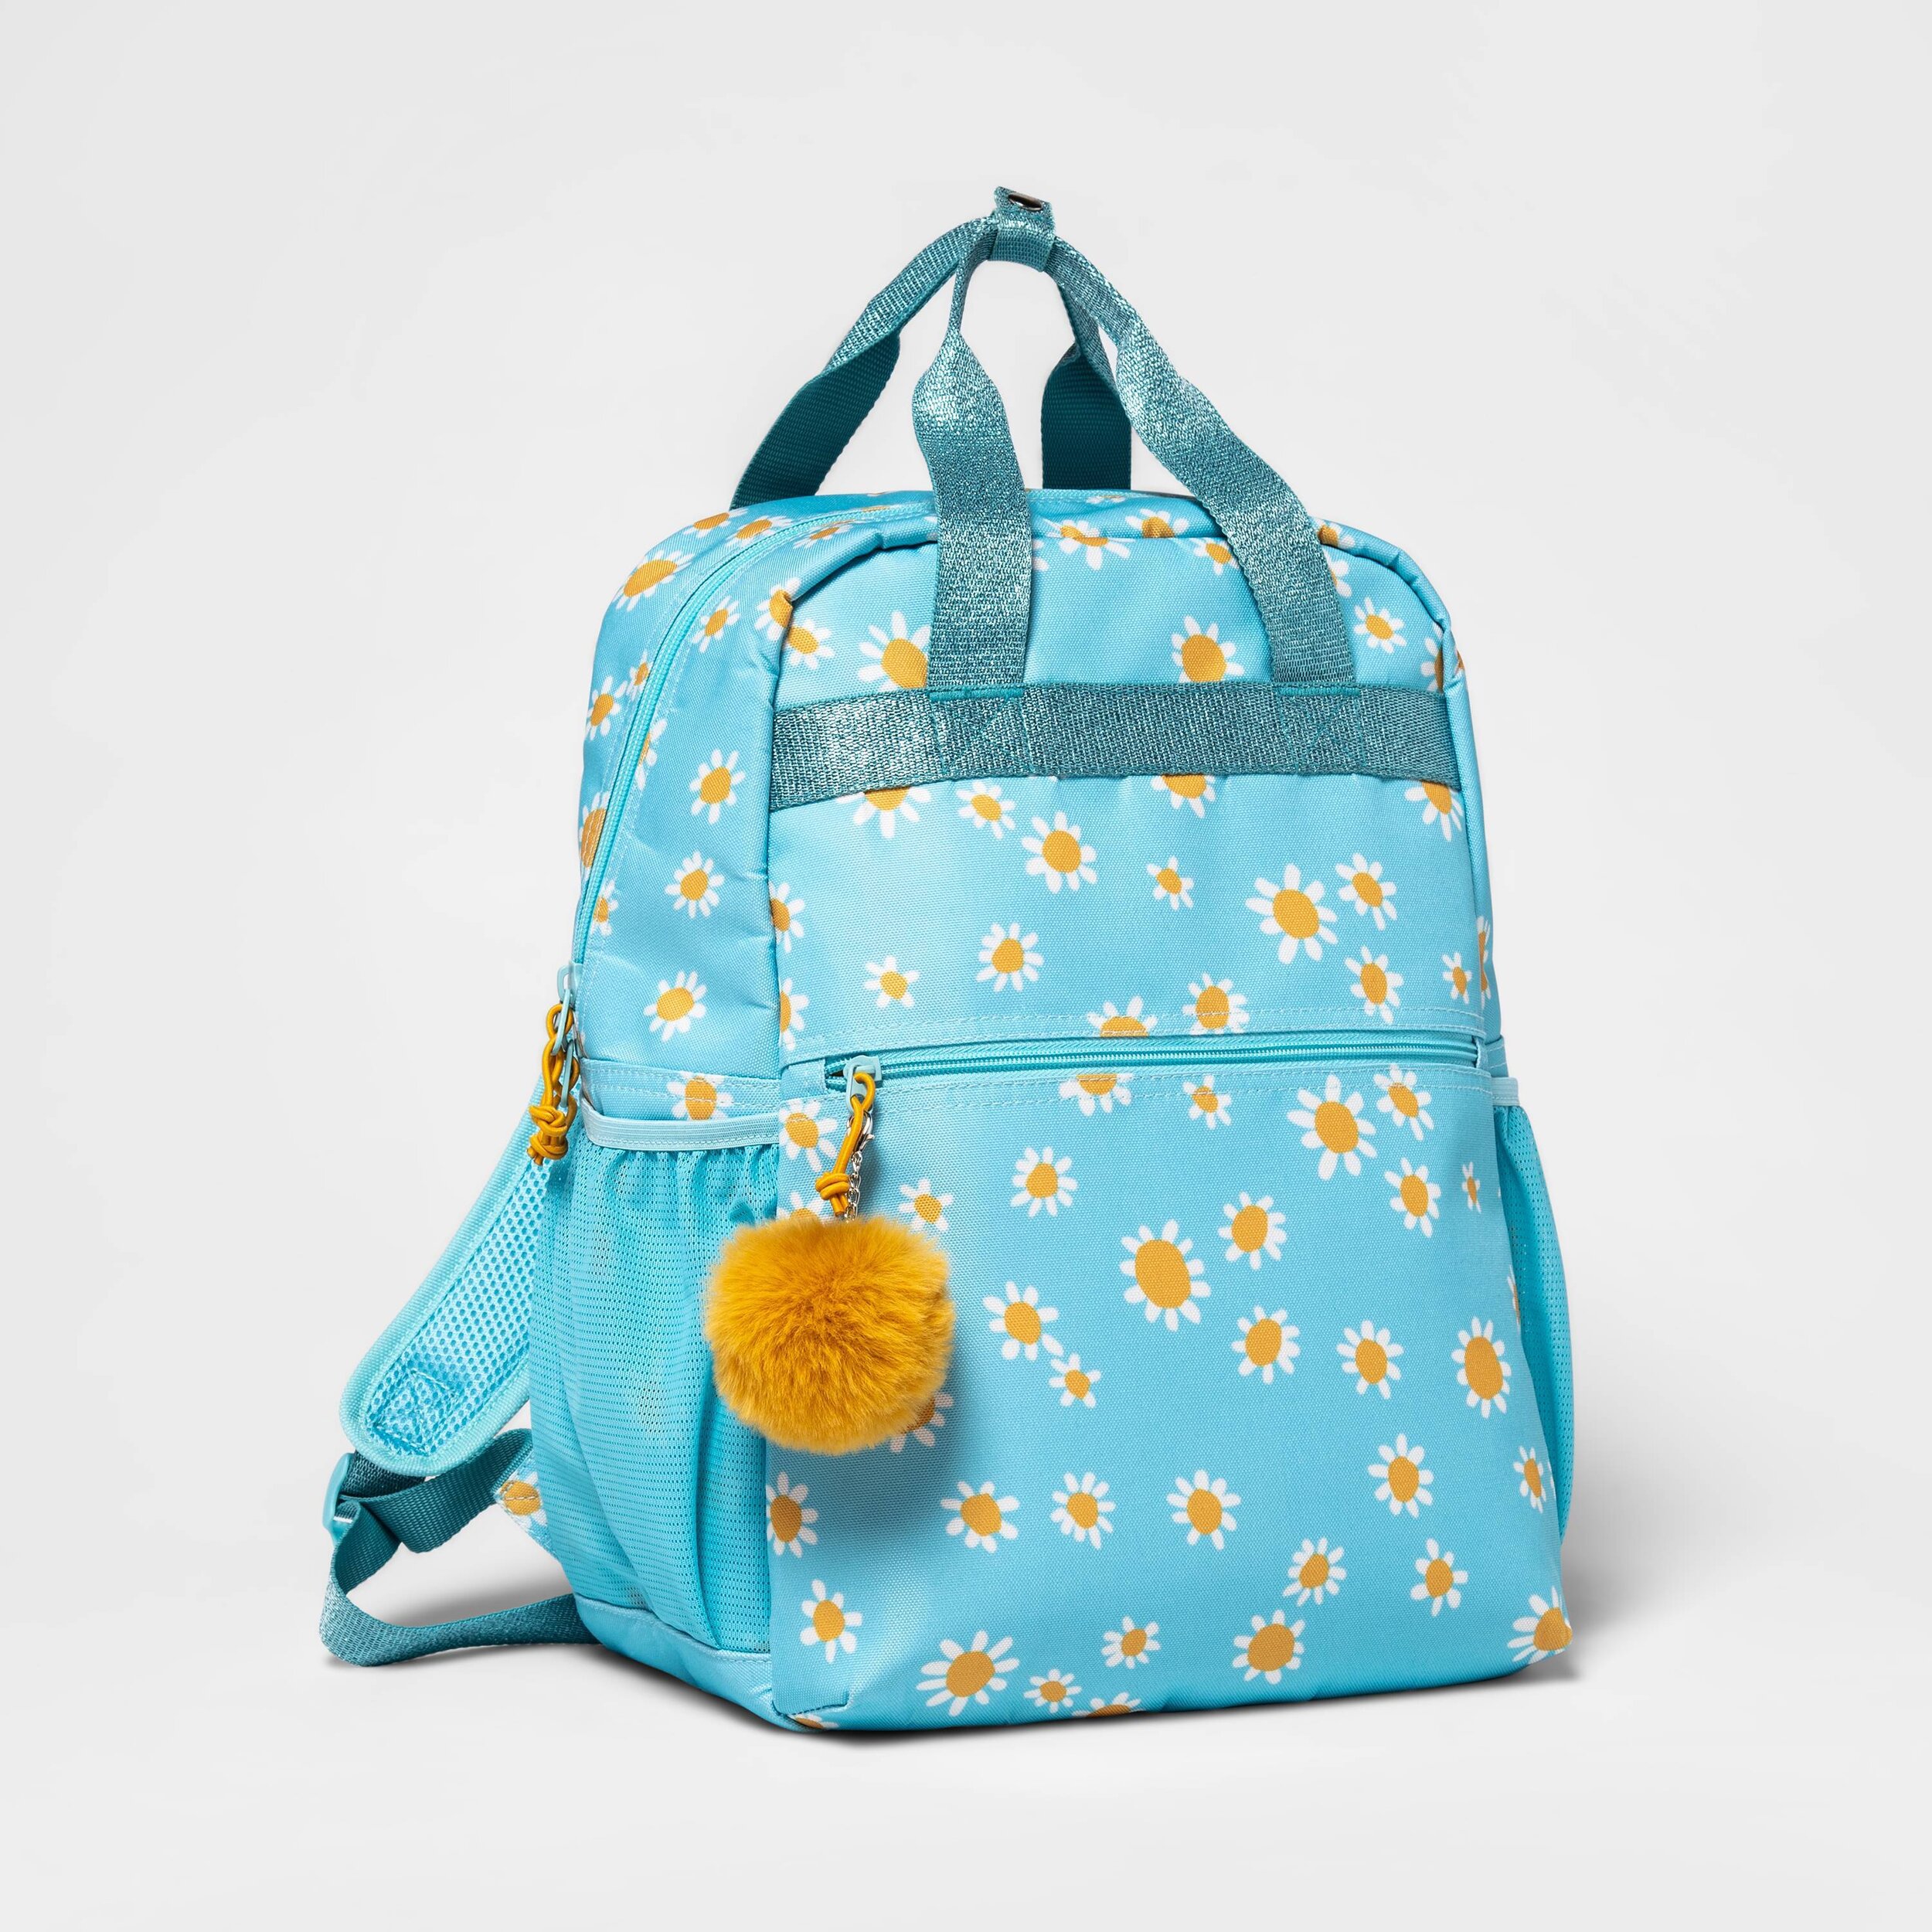 CAT&JACK 15.5in Top Handle Backpack Daisy 3D.jpeg